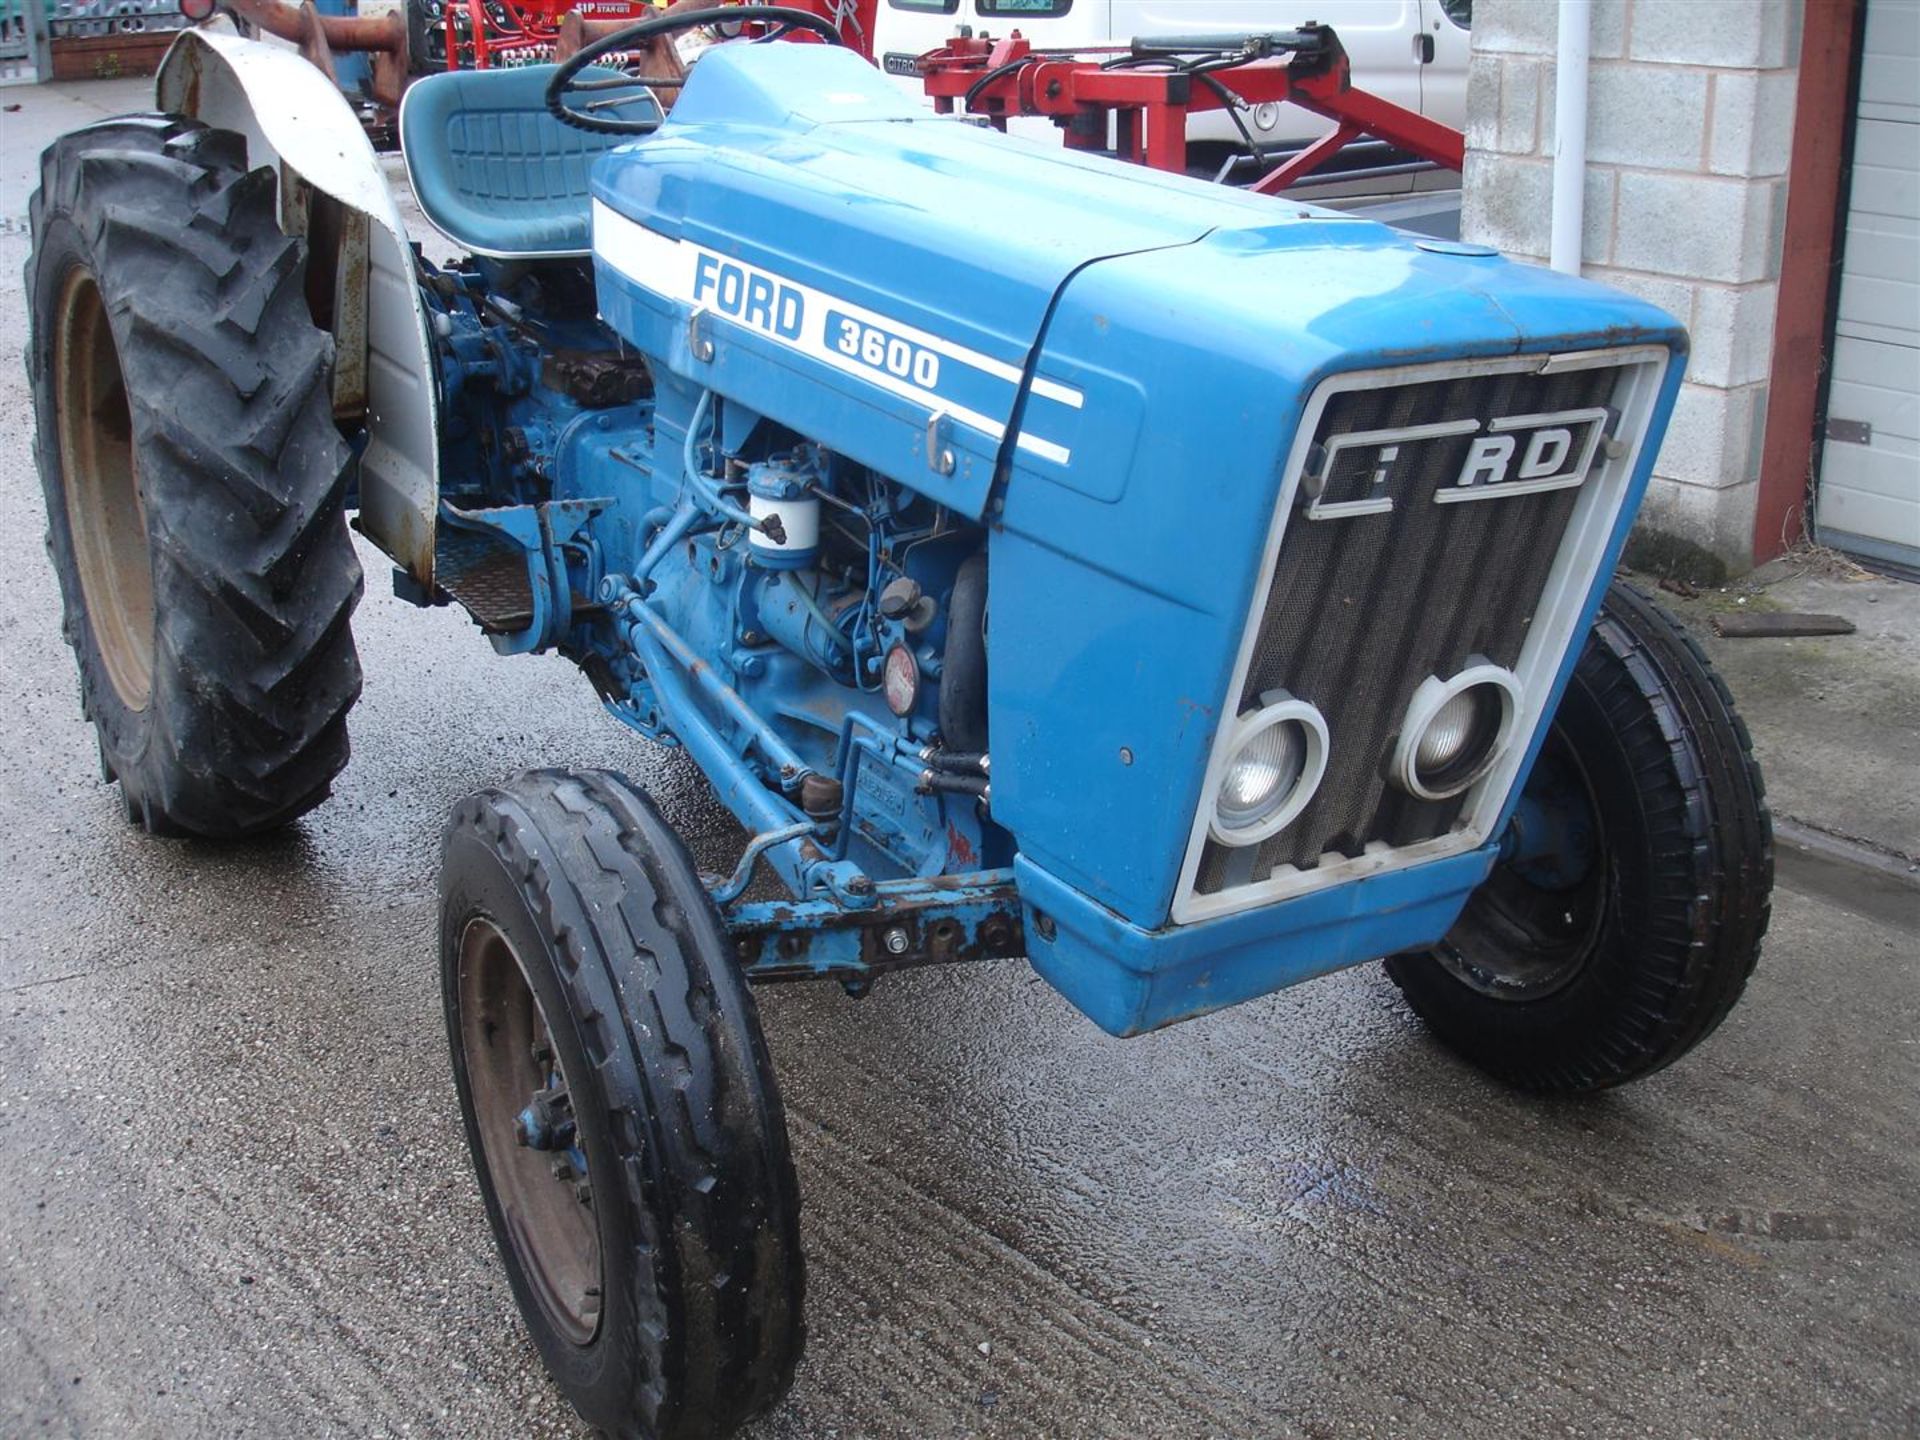 FORD 3600 3cylinder diesel TRACTOR (Orchard) Reg No: DNO 220T Serial No: A353837 Hours: 1312 An ex